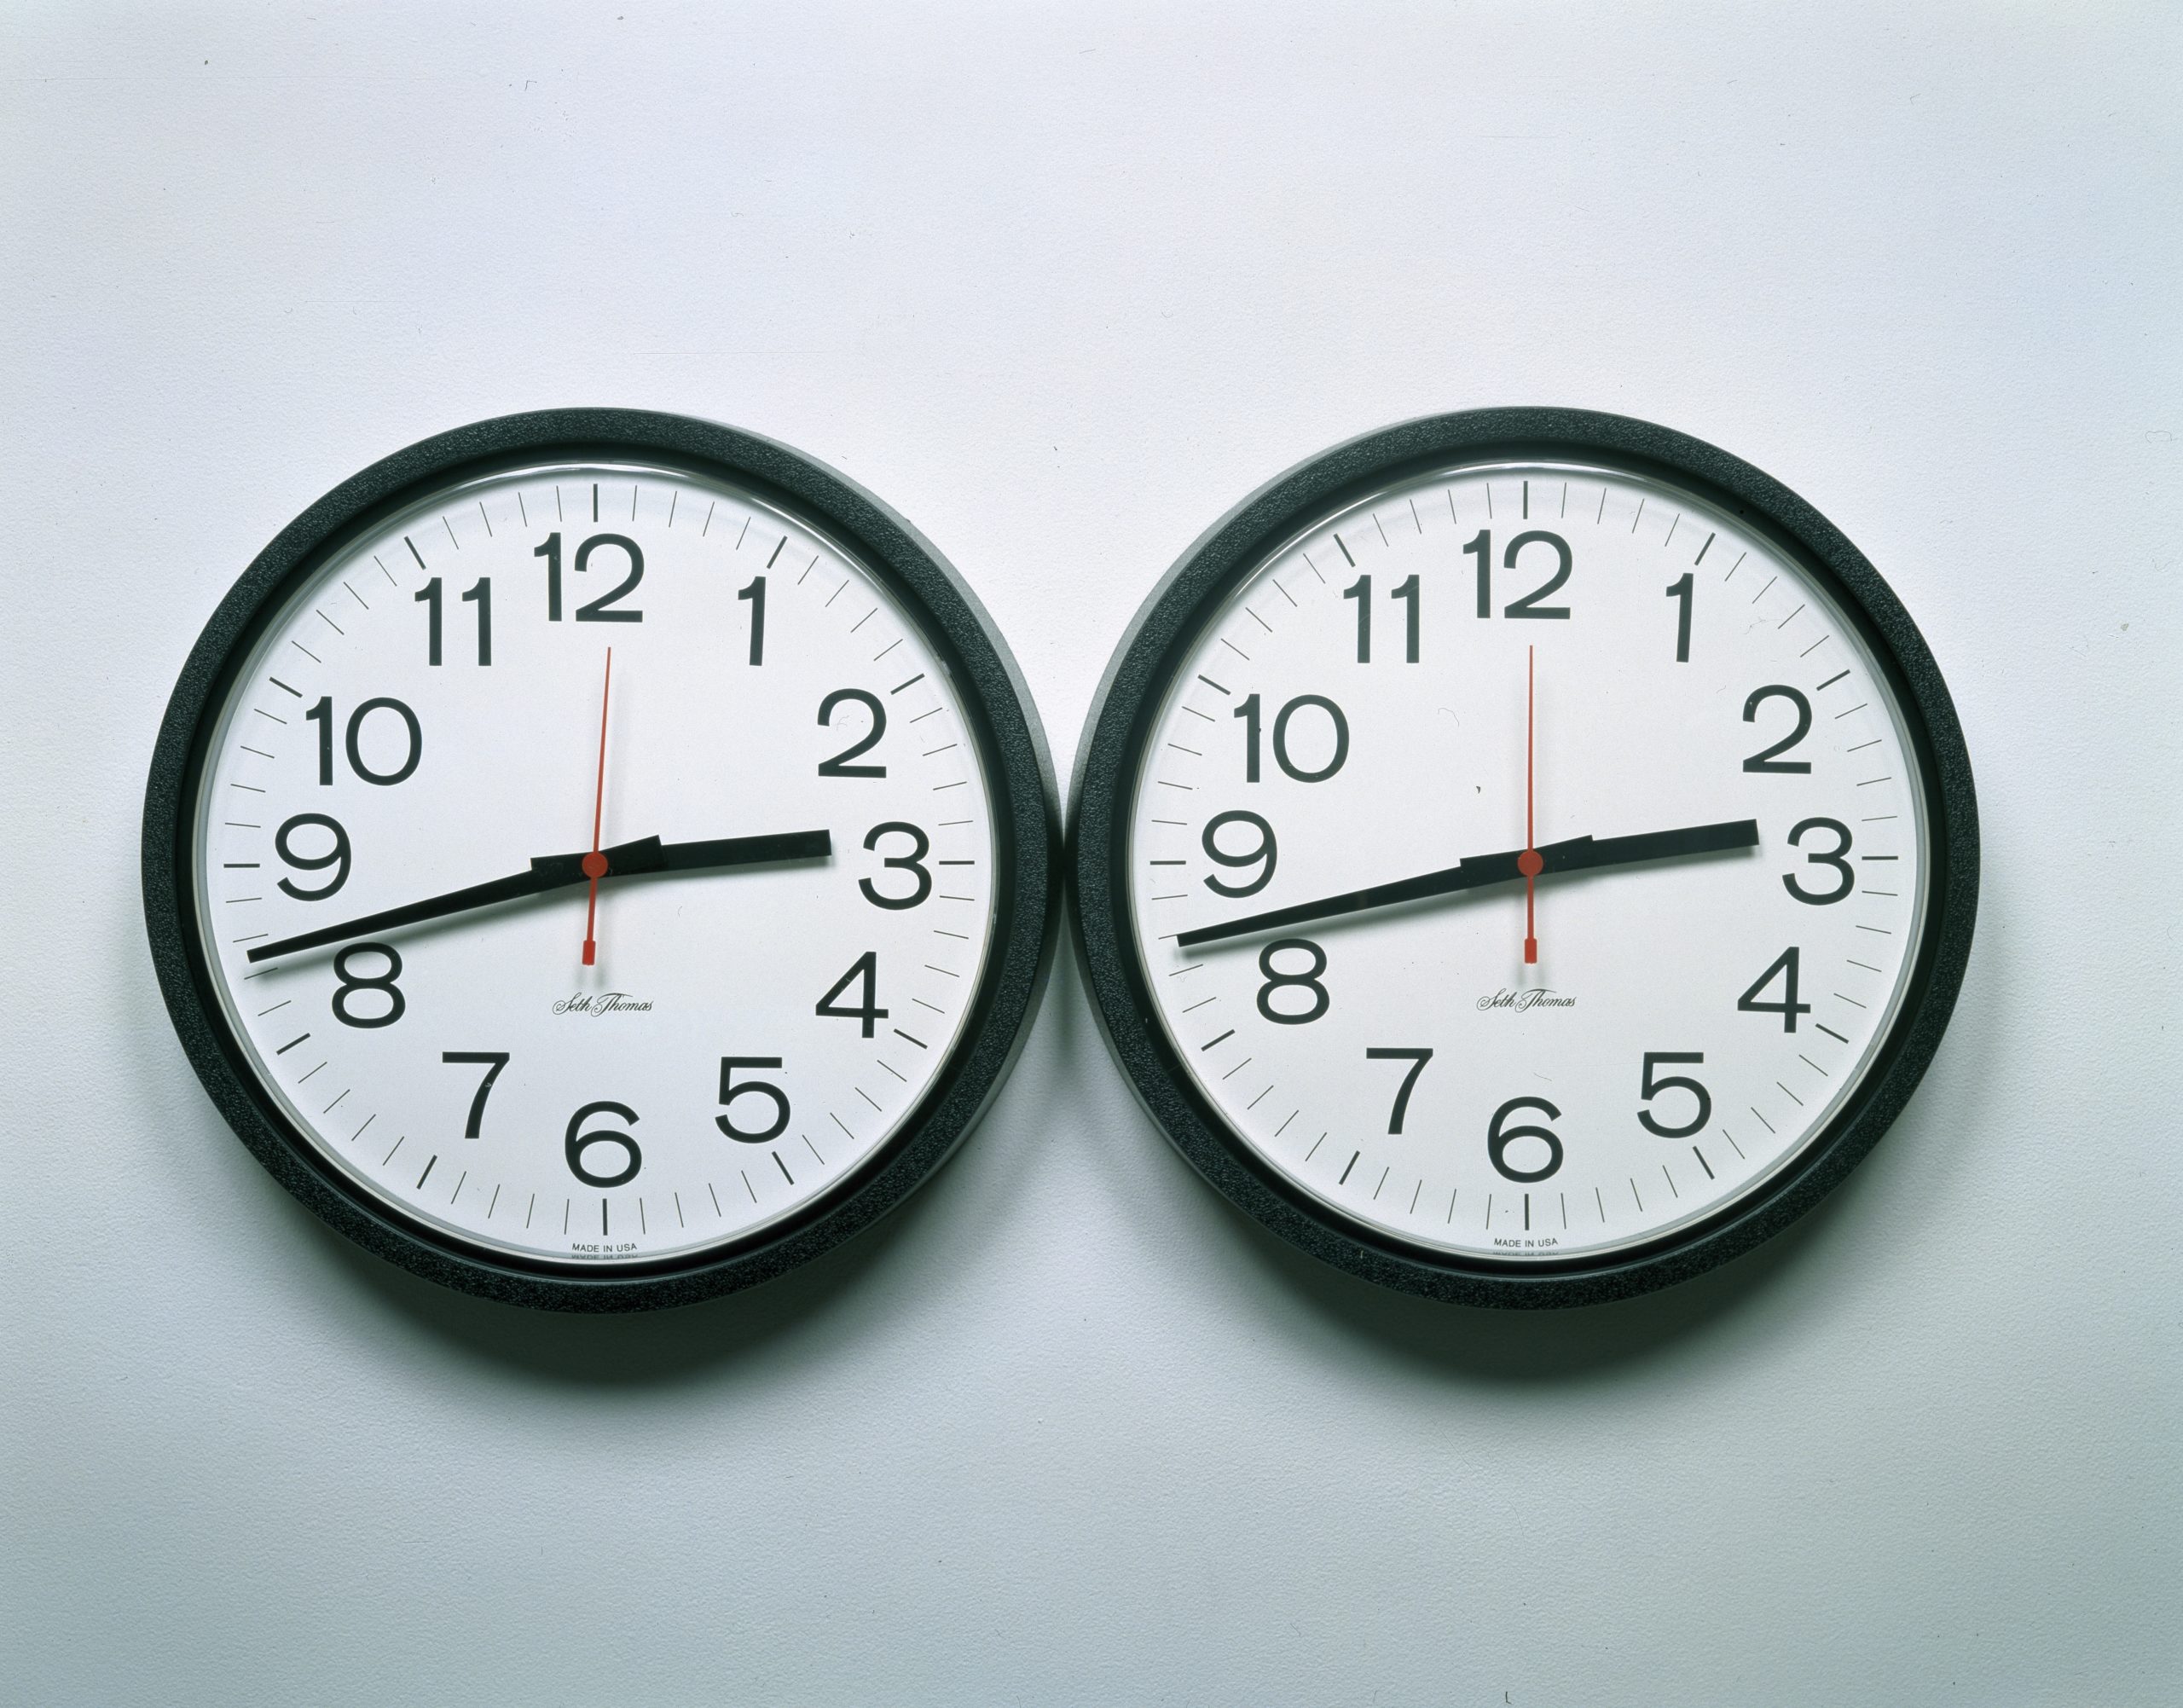 Two clocks with the same time right next to each other on the wall.